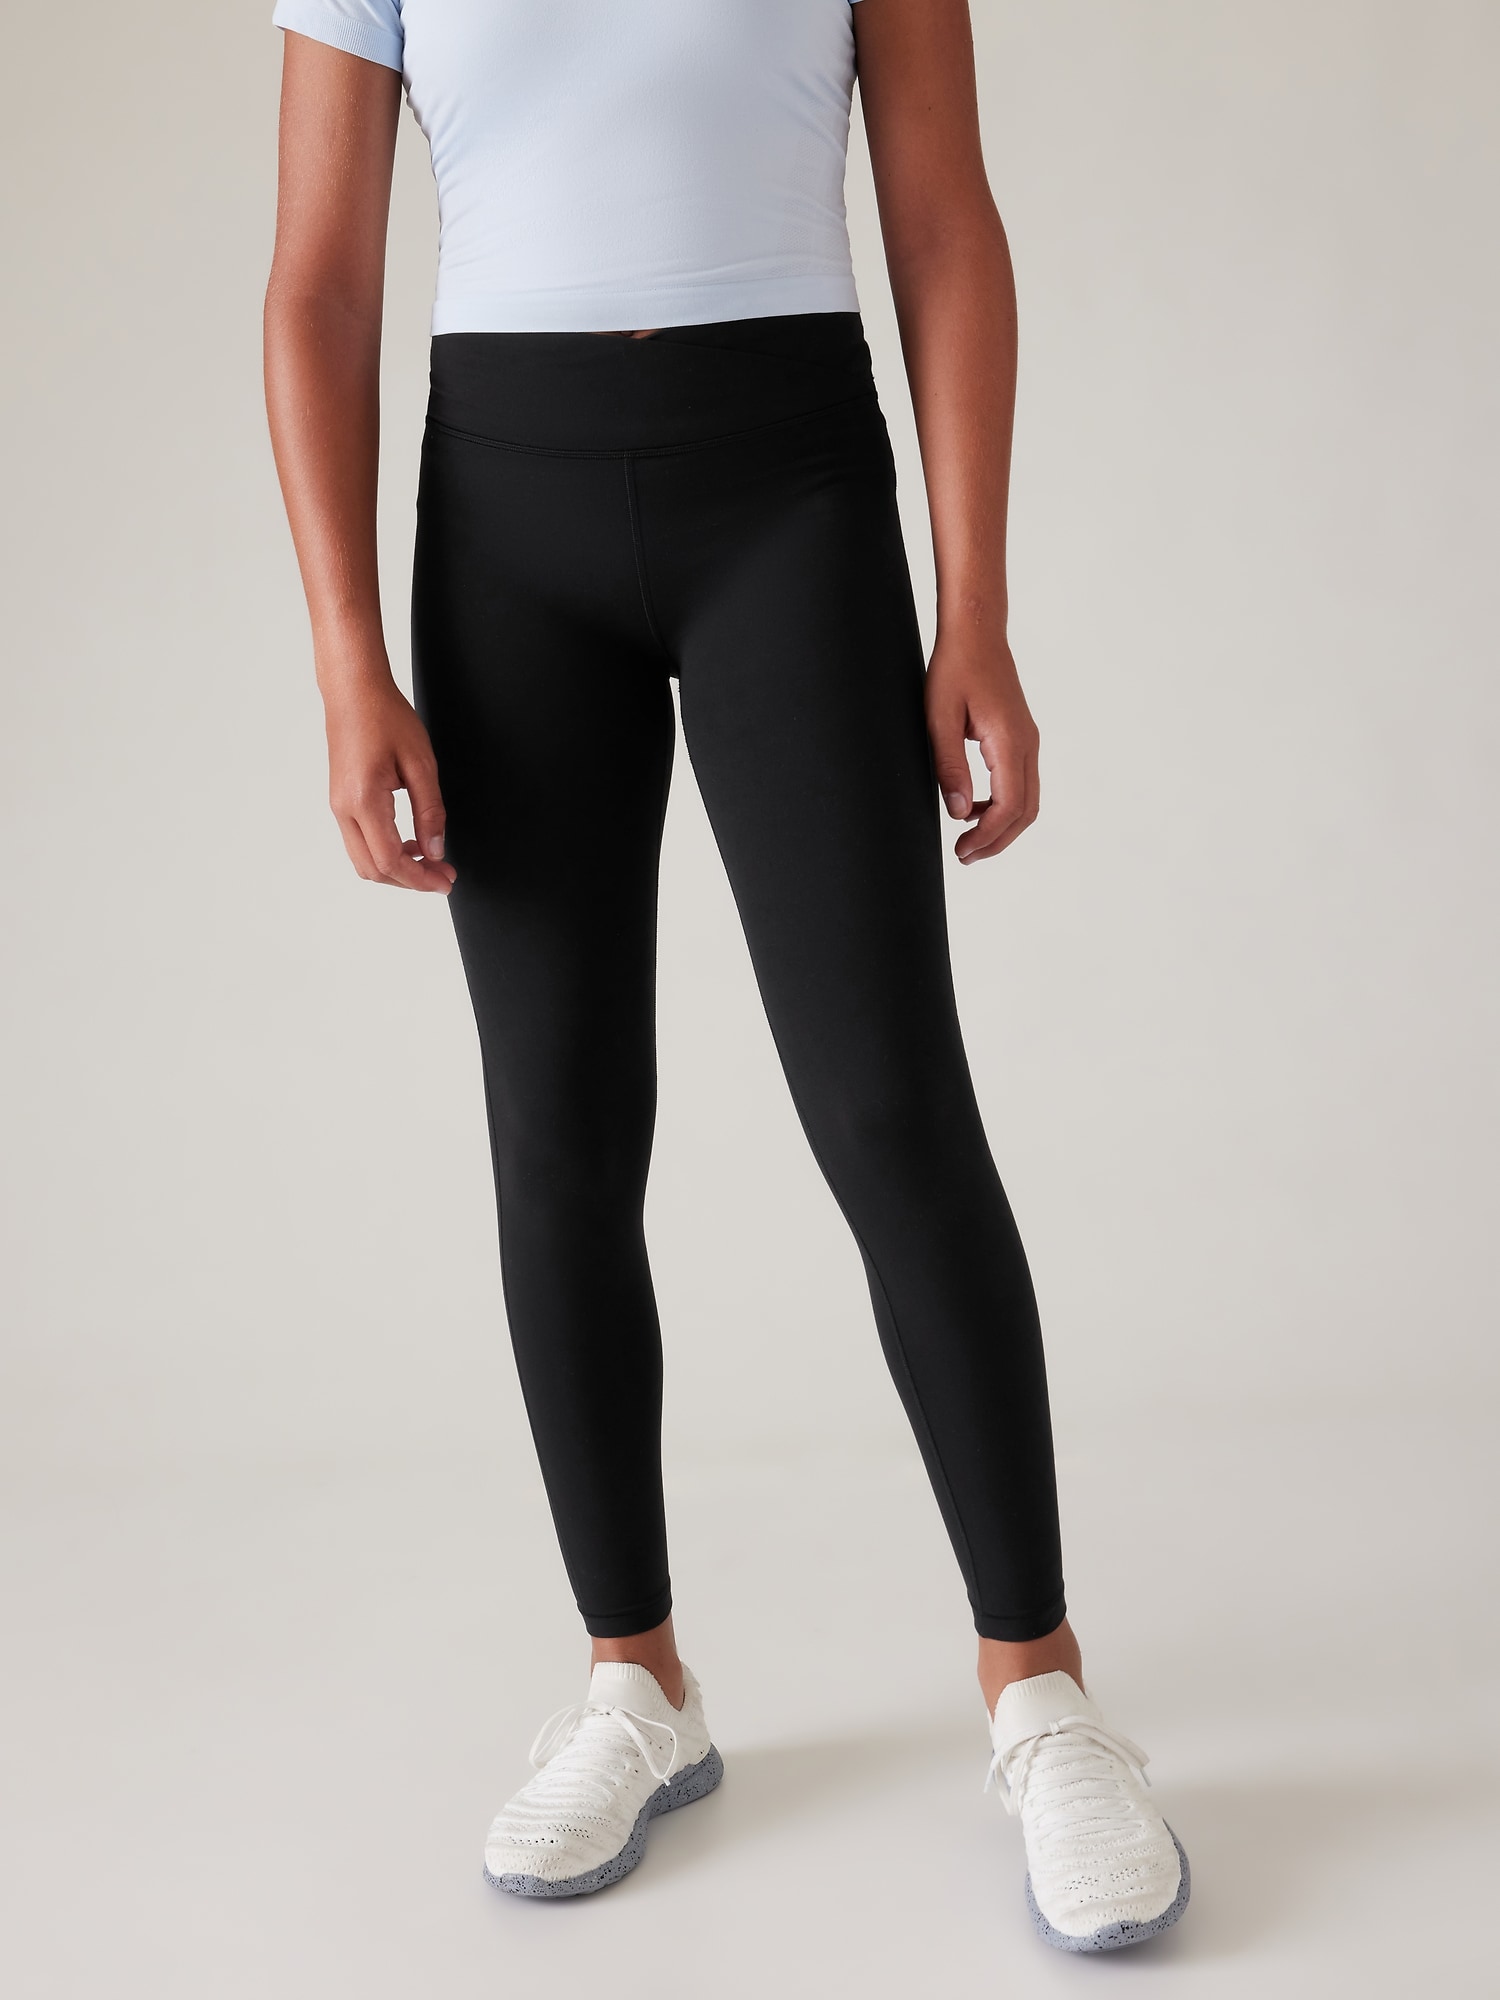 Relentless Crossover High Rise 7/8 Tights